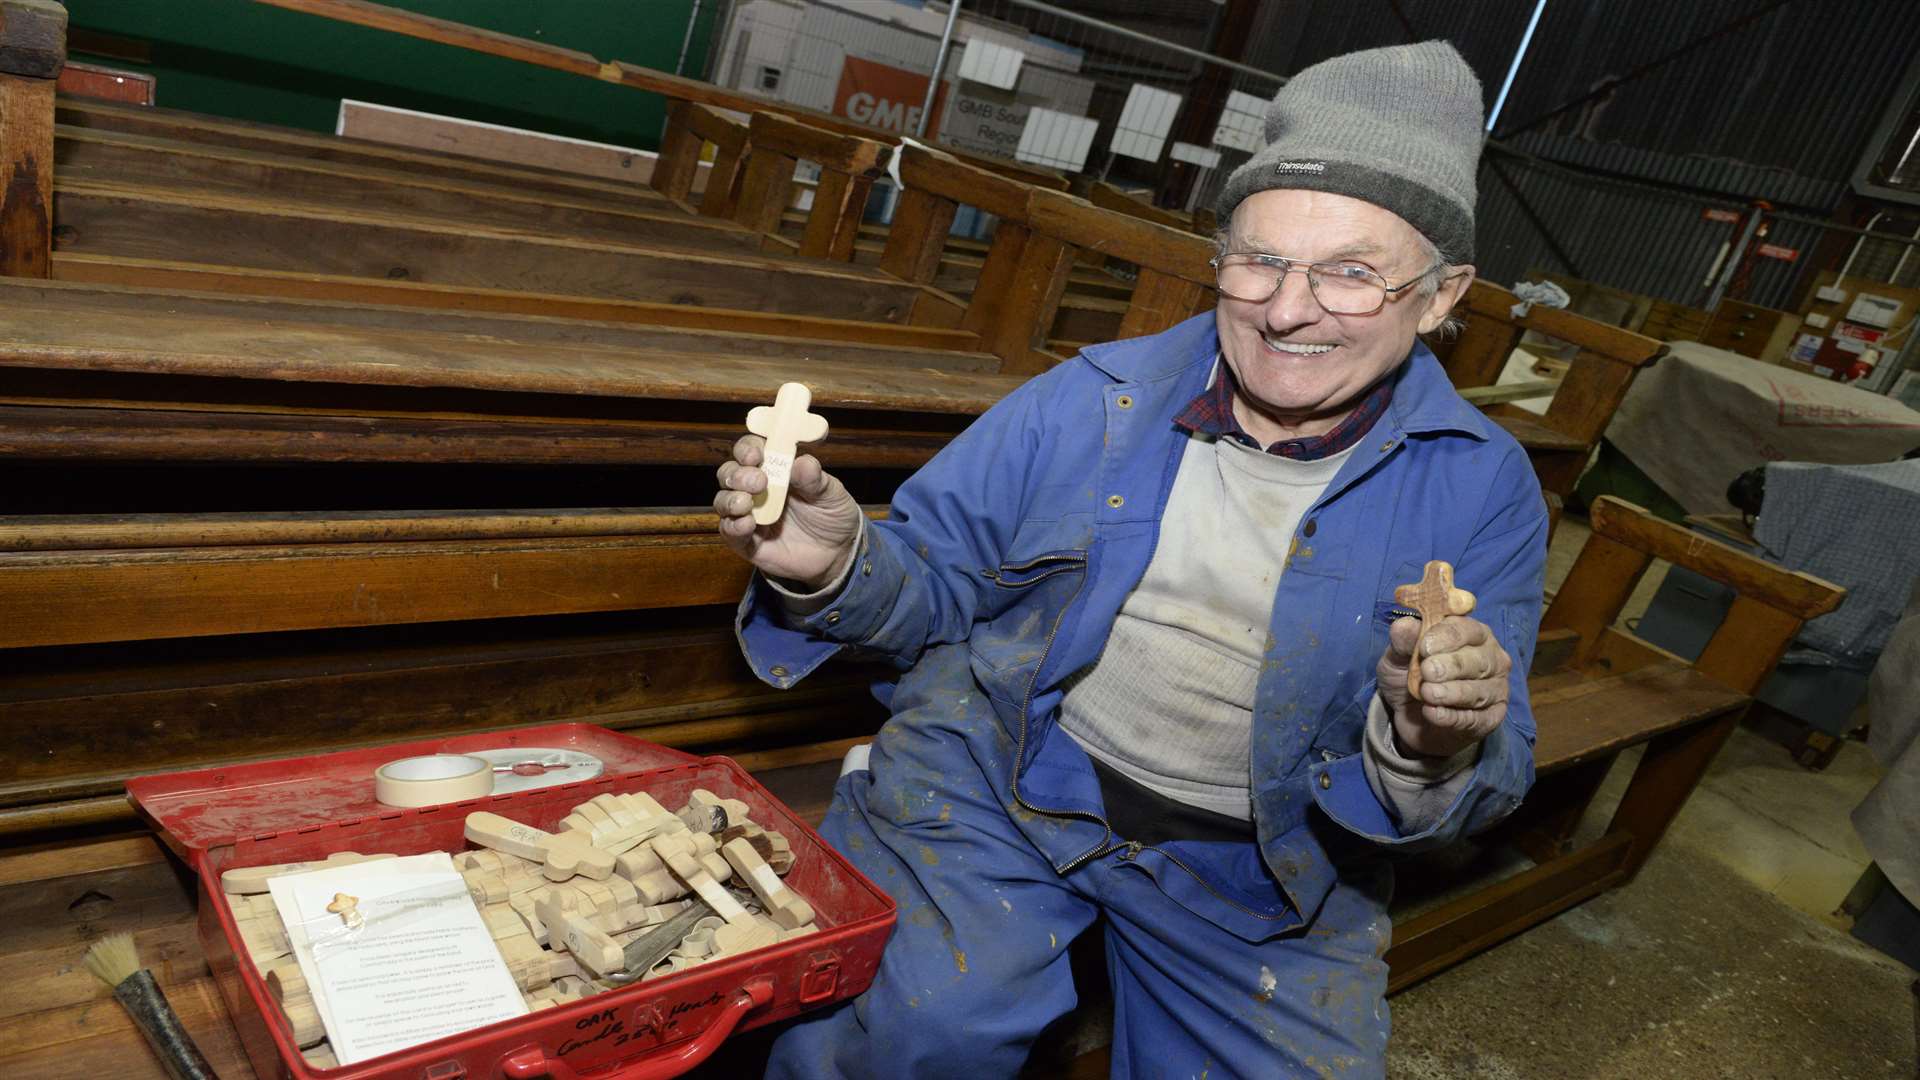 Brian with the crosses made for the church which has donated the pews to be made into seats